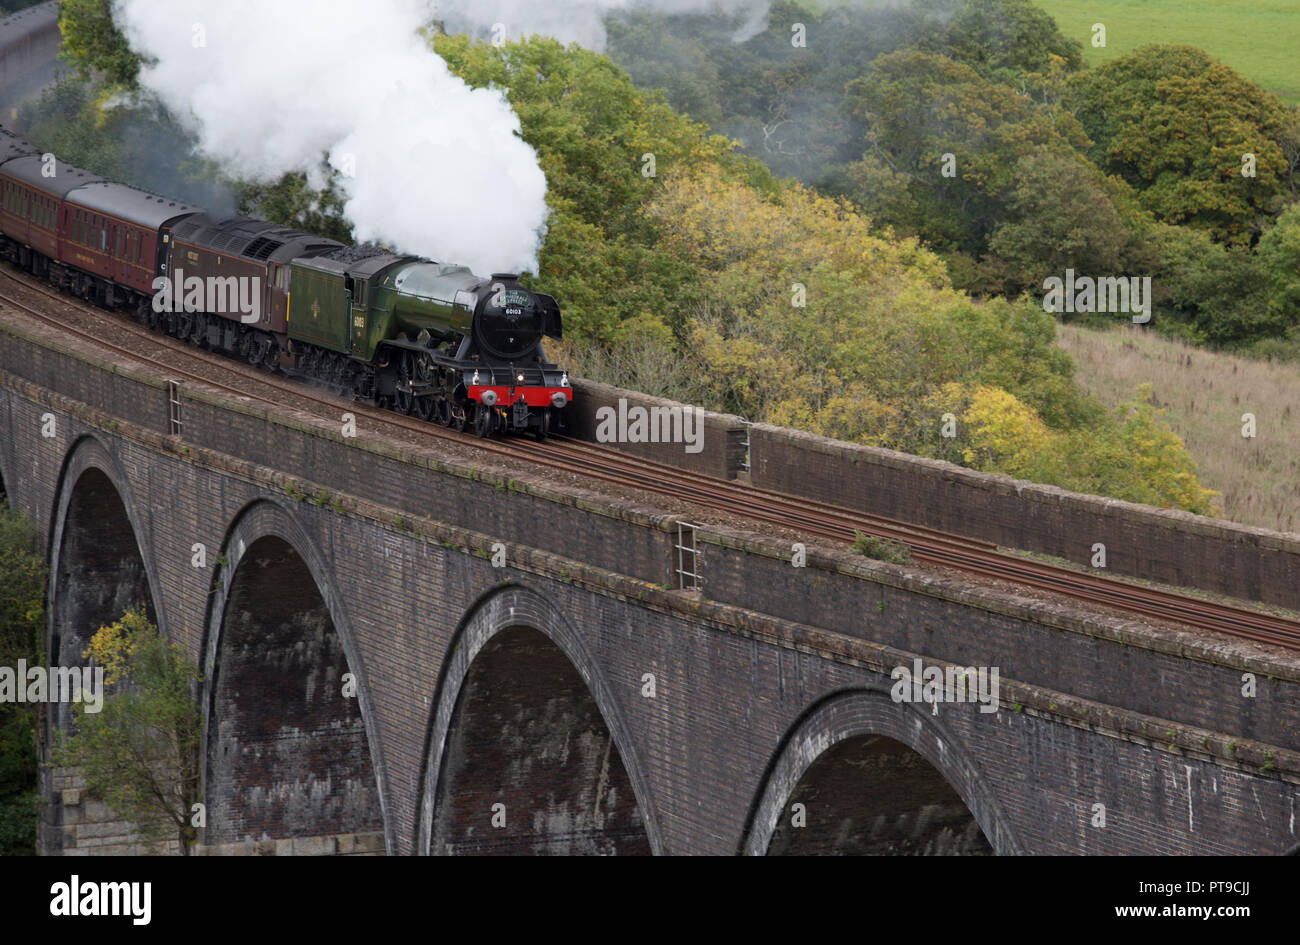 Flying Scotsman coming across forder viaduct on its way into Cornwall Stock Photo